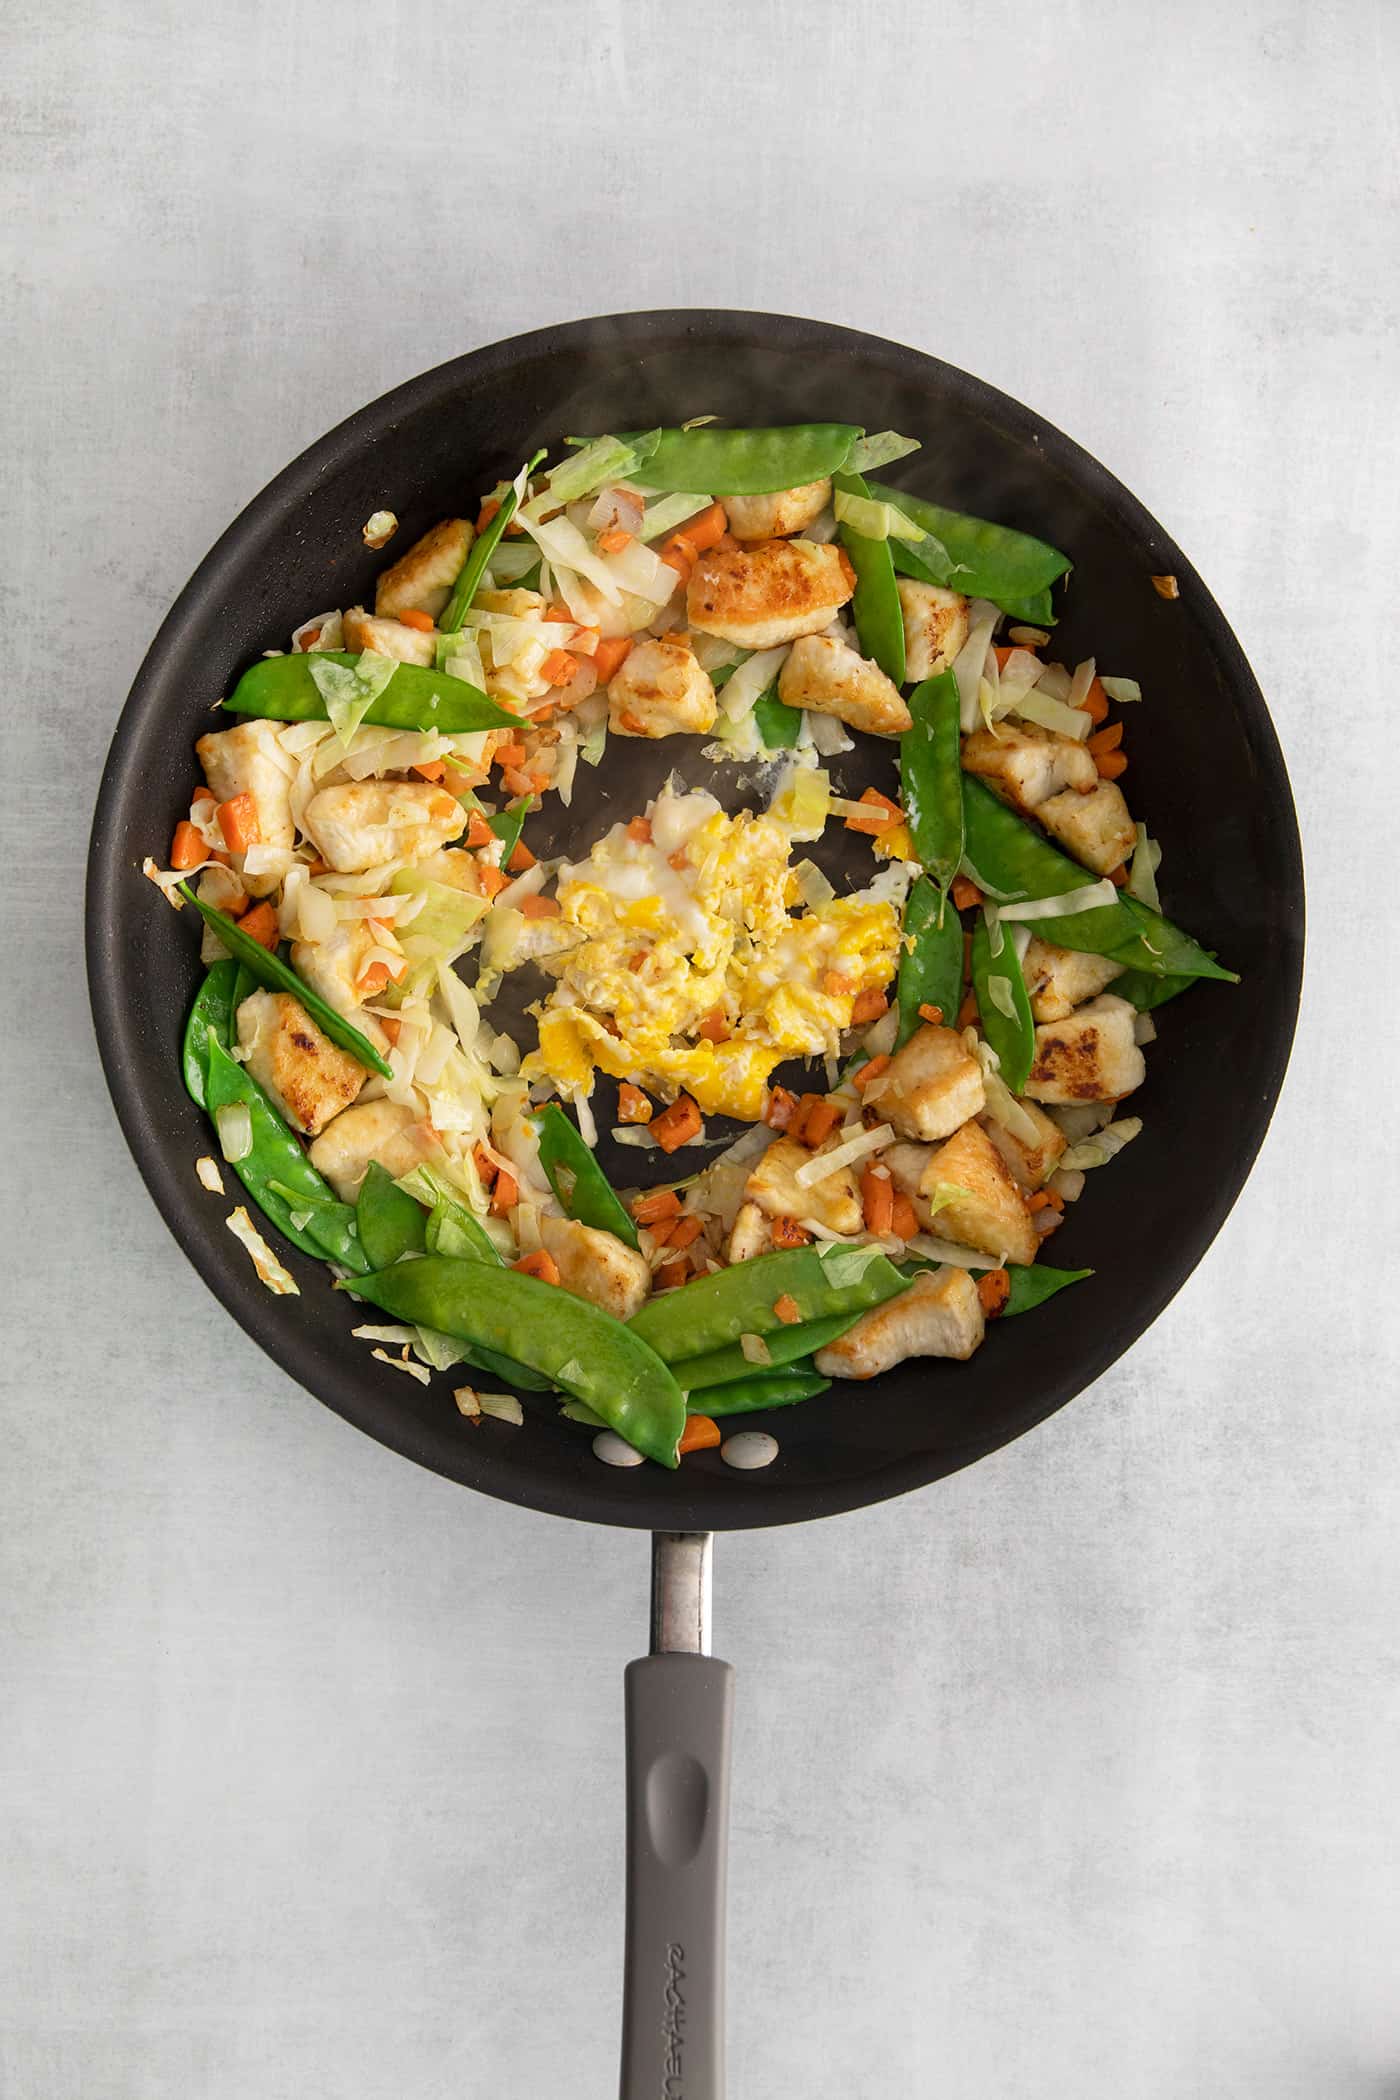 Chicken stir fry with egg in the center